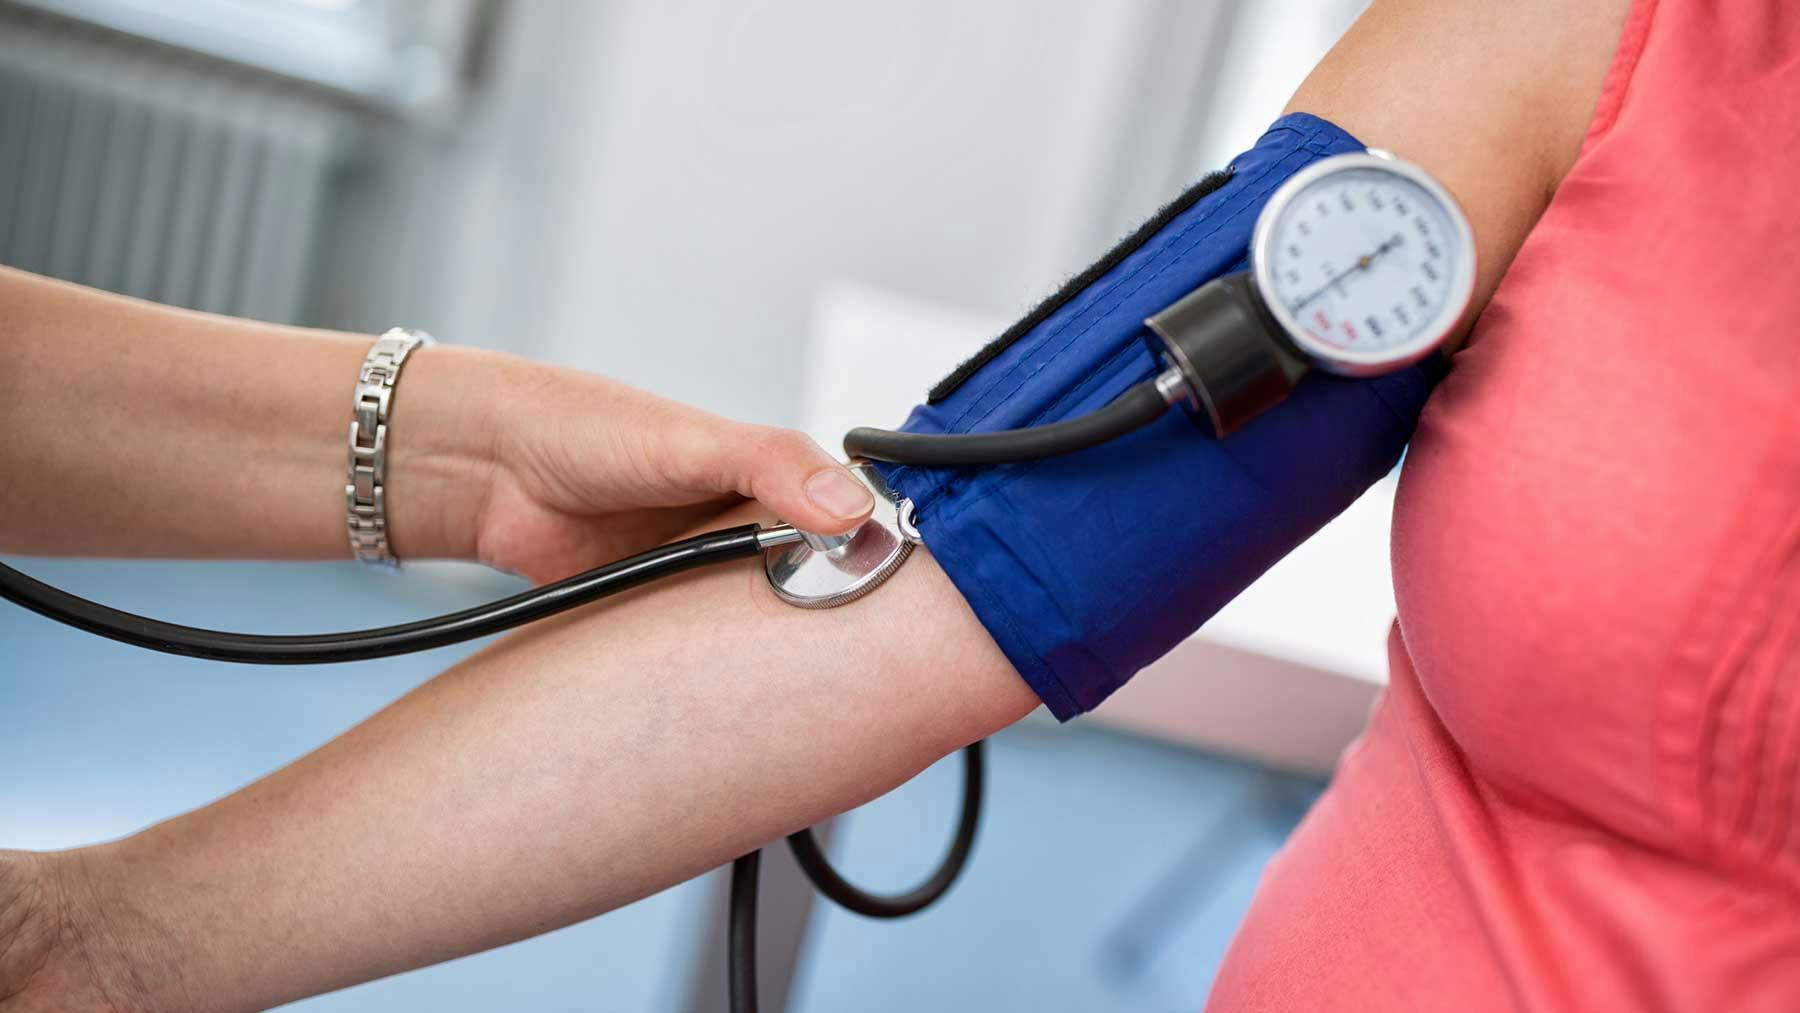 Could Assist in Maintaining A Healthy Blood Pressure Level